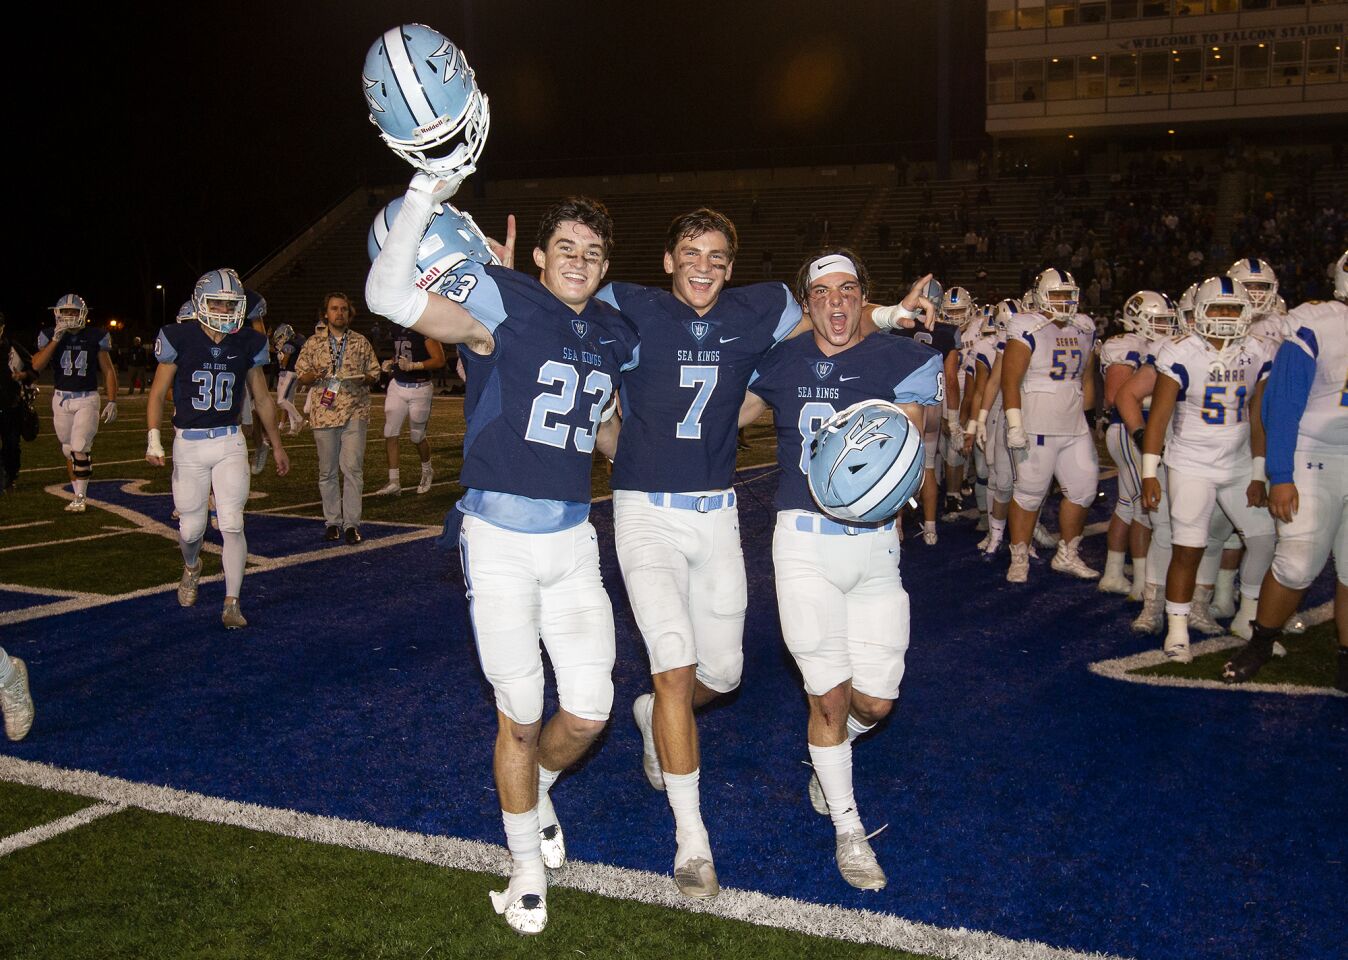 Corona del Mar's Zack Green, left, Mason Gecowets, center, and Ryder Haupt, right, are all smiles after the Sea Kings defeat Serra.